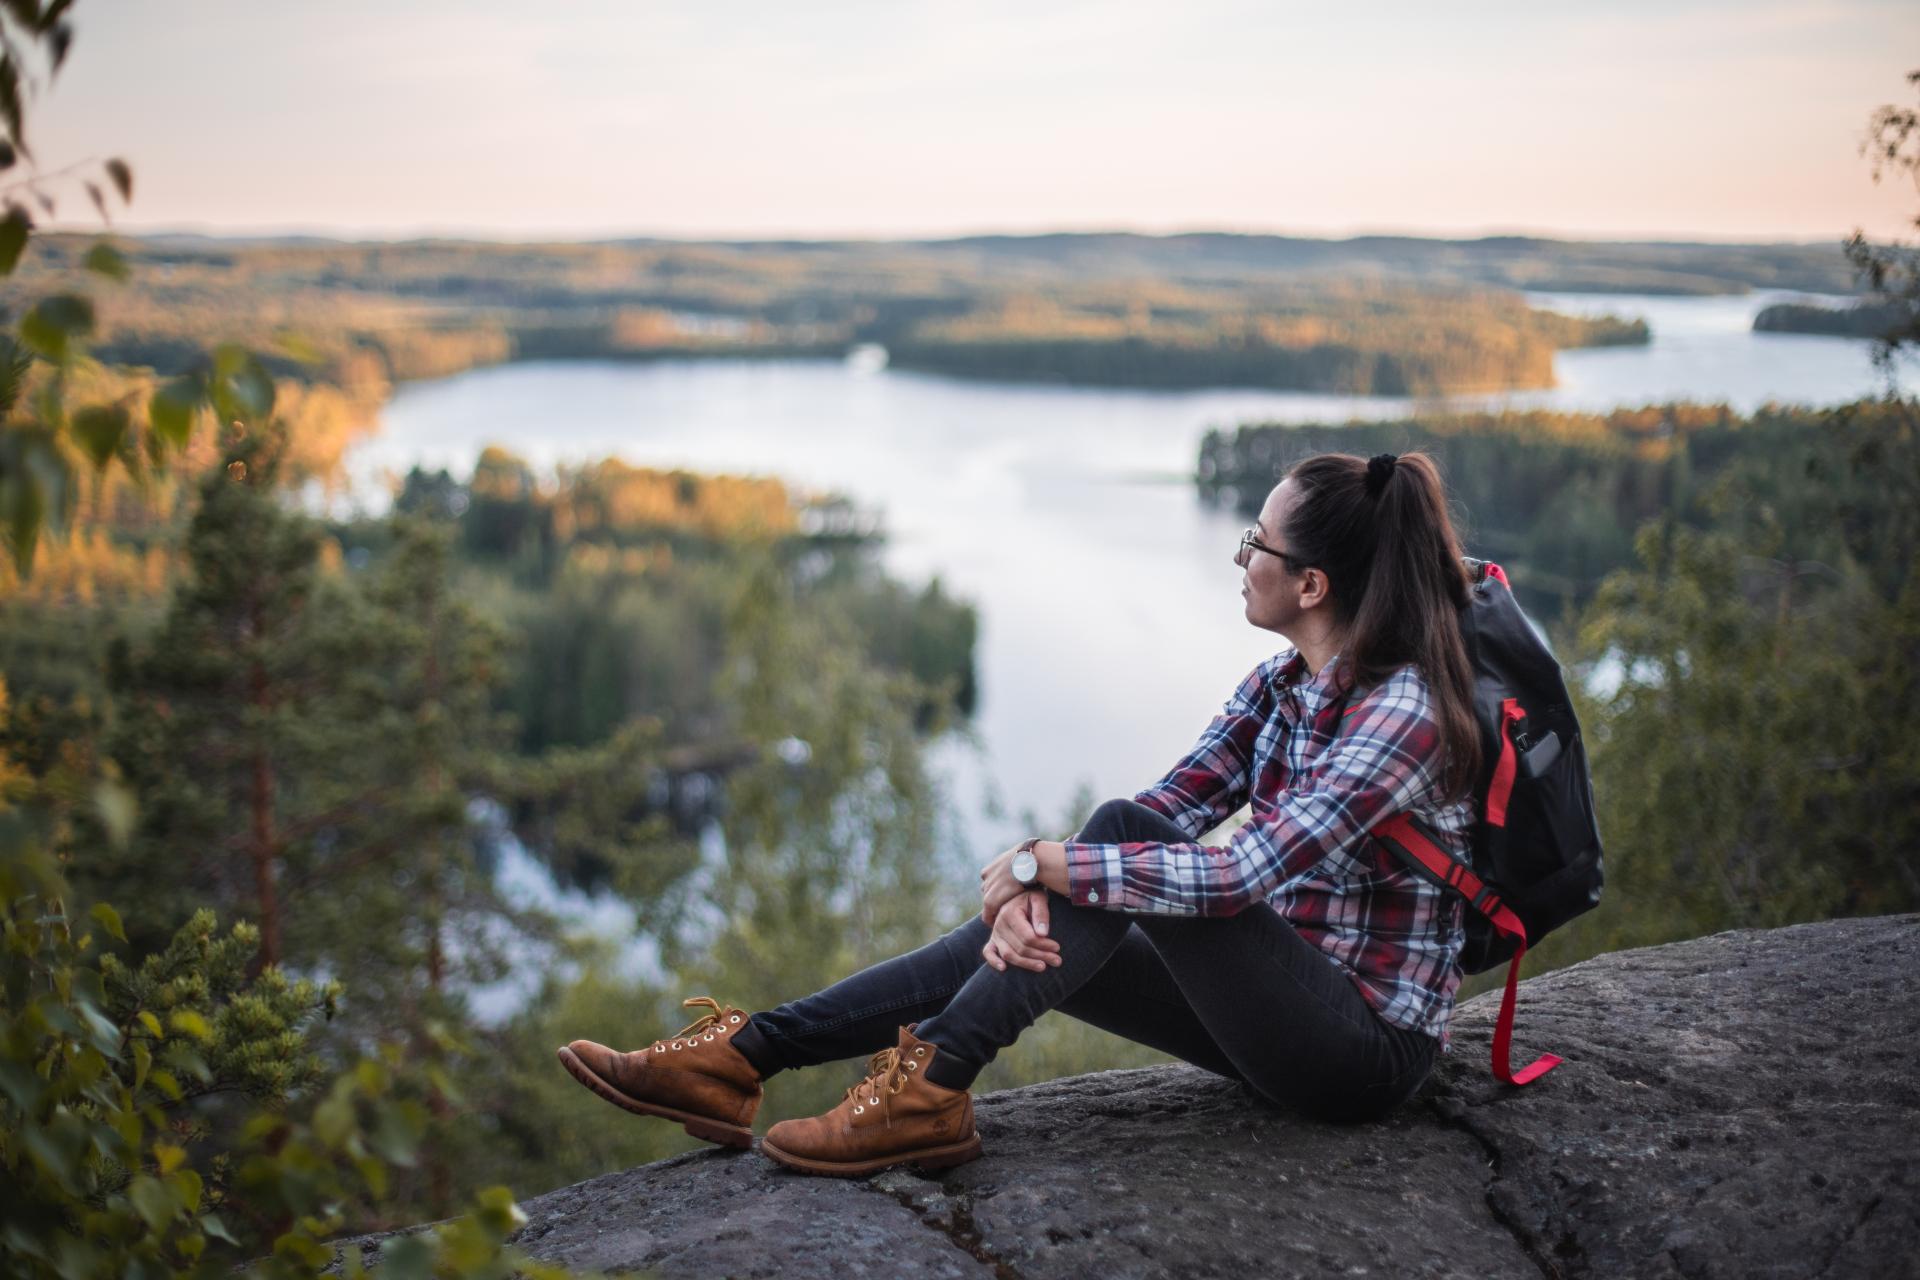 A woman is sitting on cliff and admiring the view over the Luonteri archipelago.